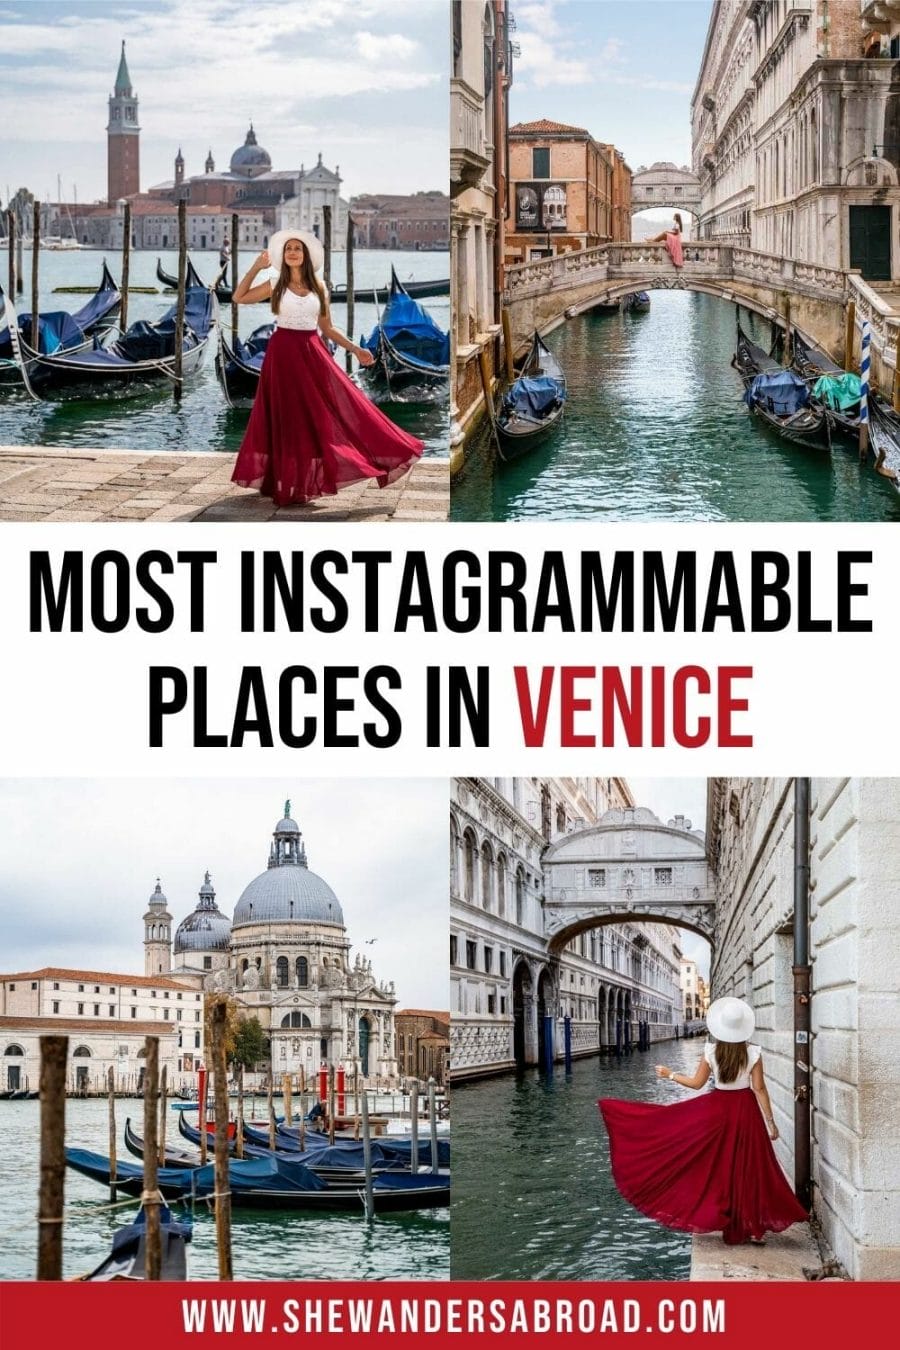 20 Incredible Venice Instagram Spots You Can't Miss